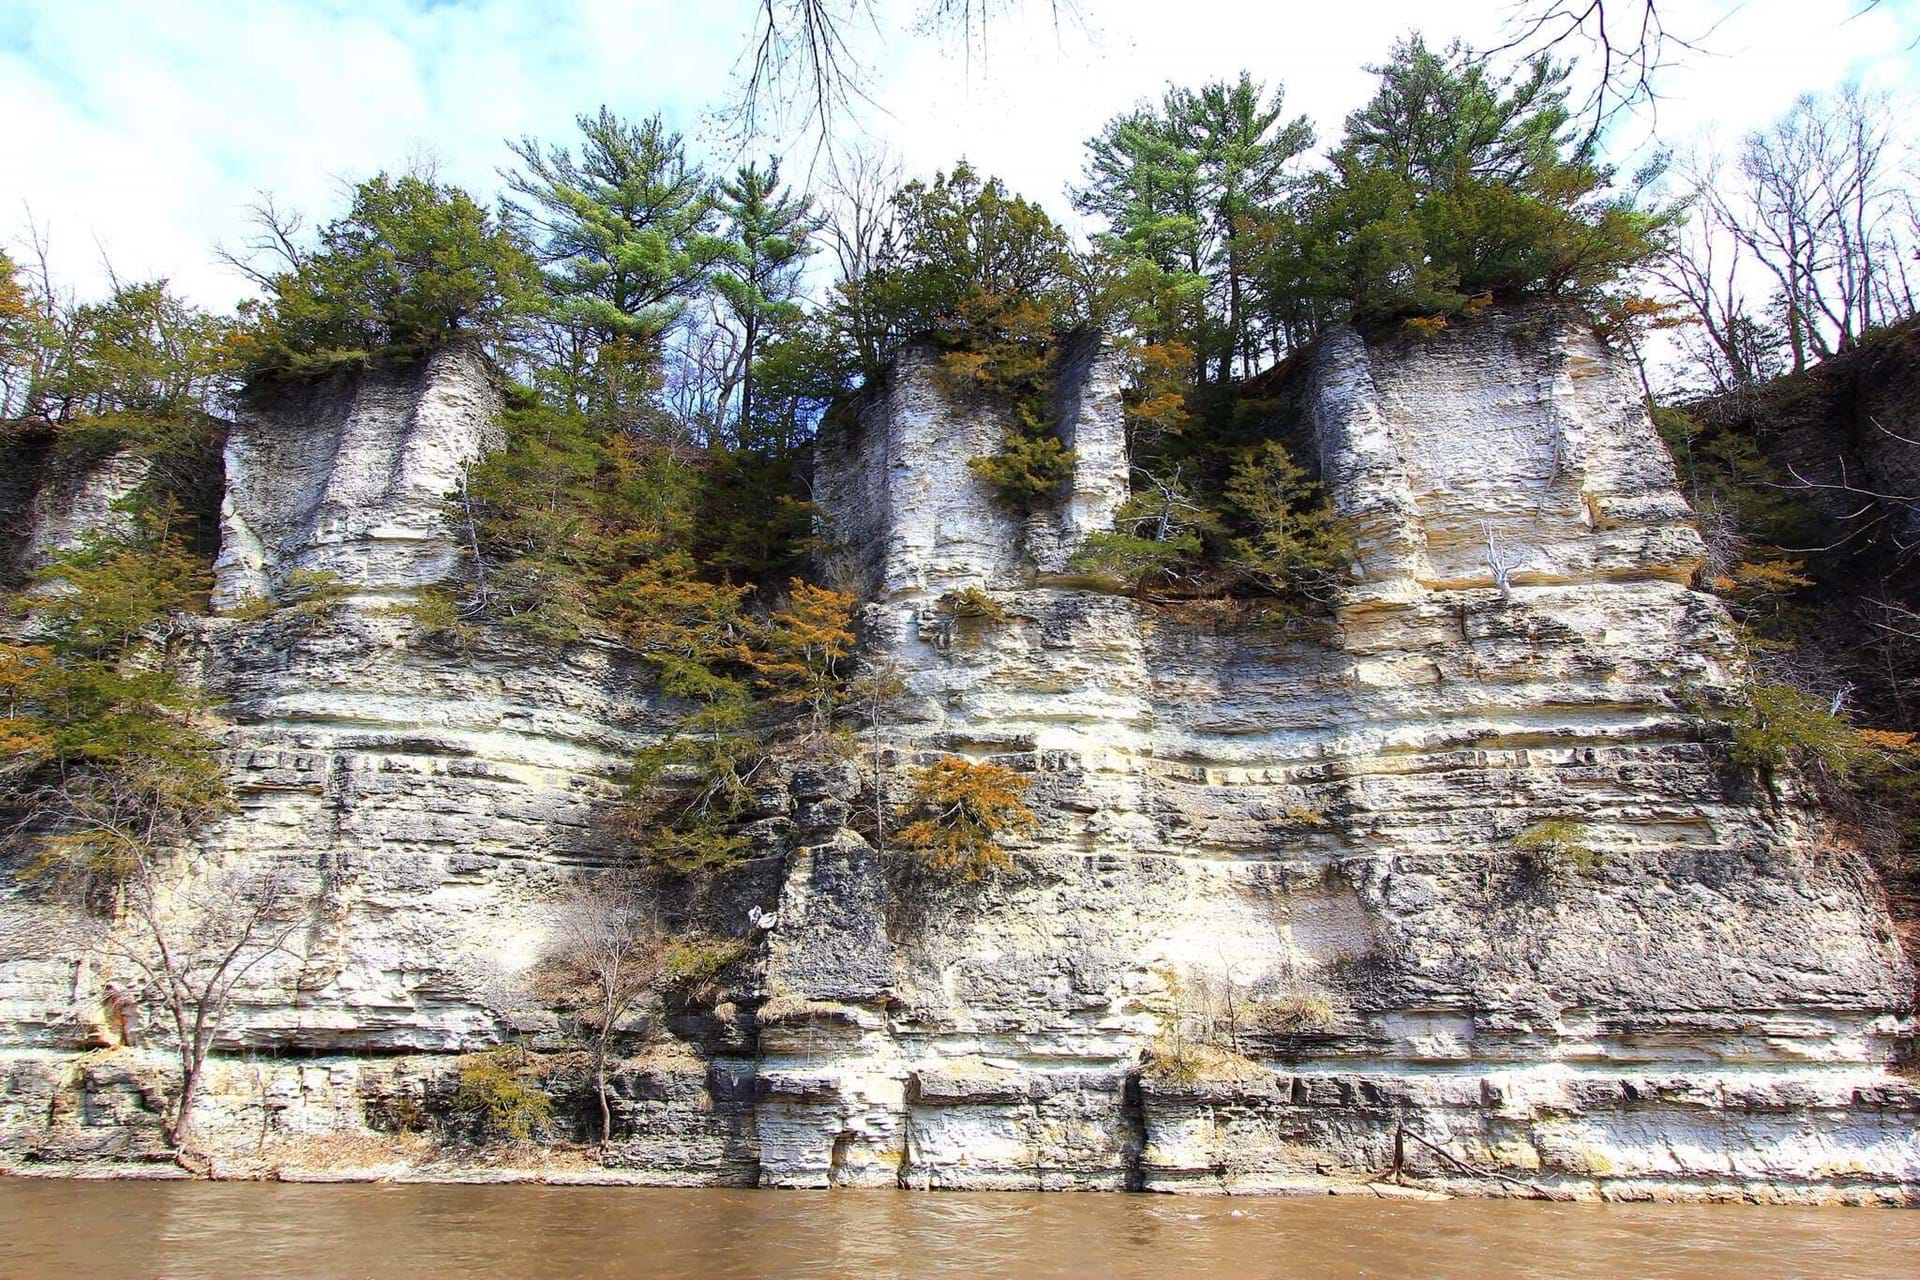 Another image of the bluffs above the river